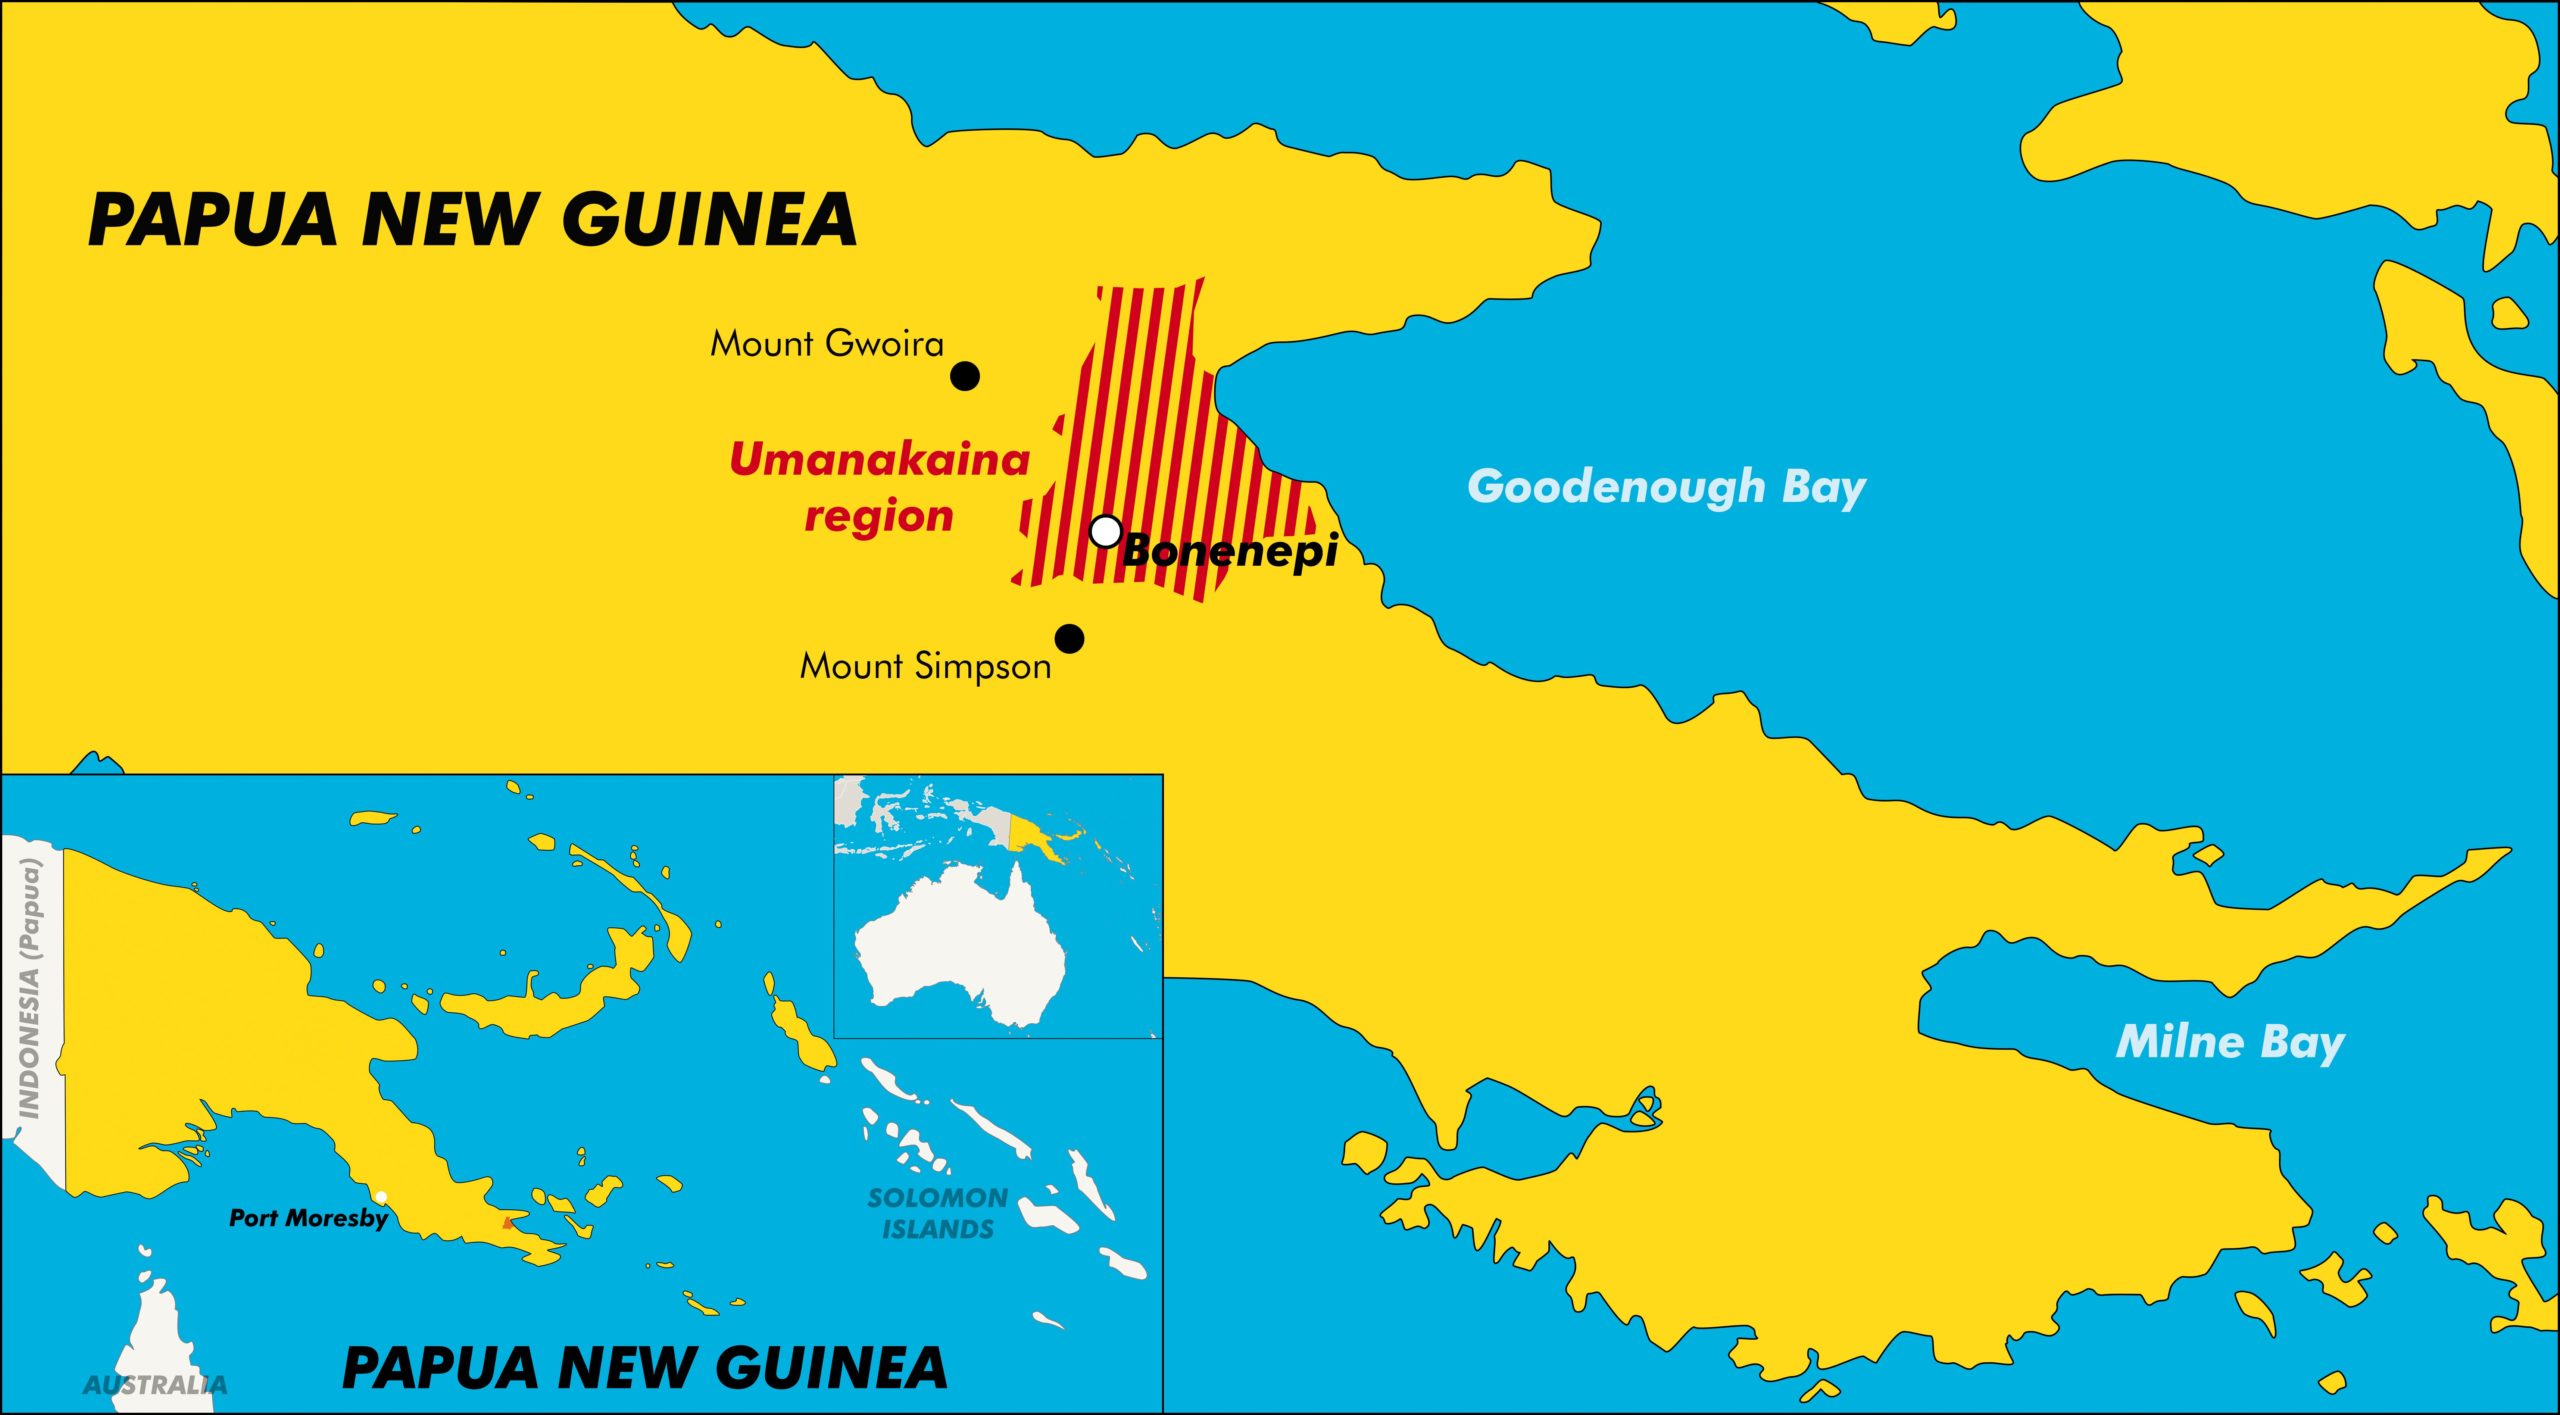 A map of Papua New Guinea, which is north of Australia. The map shows the region where Umanakaina is spoken, to the north in Goodenough Bay, with Aidani's village in the south of this region